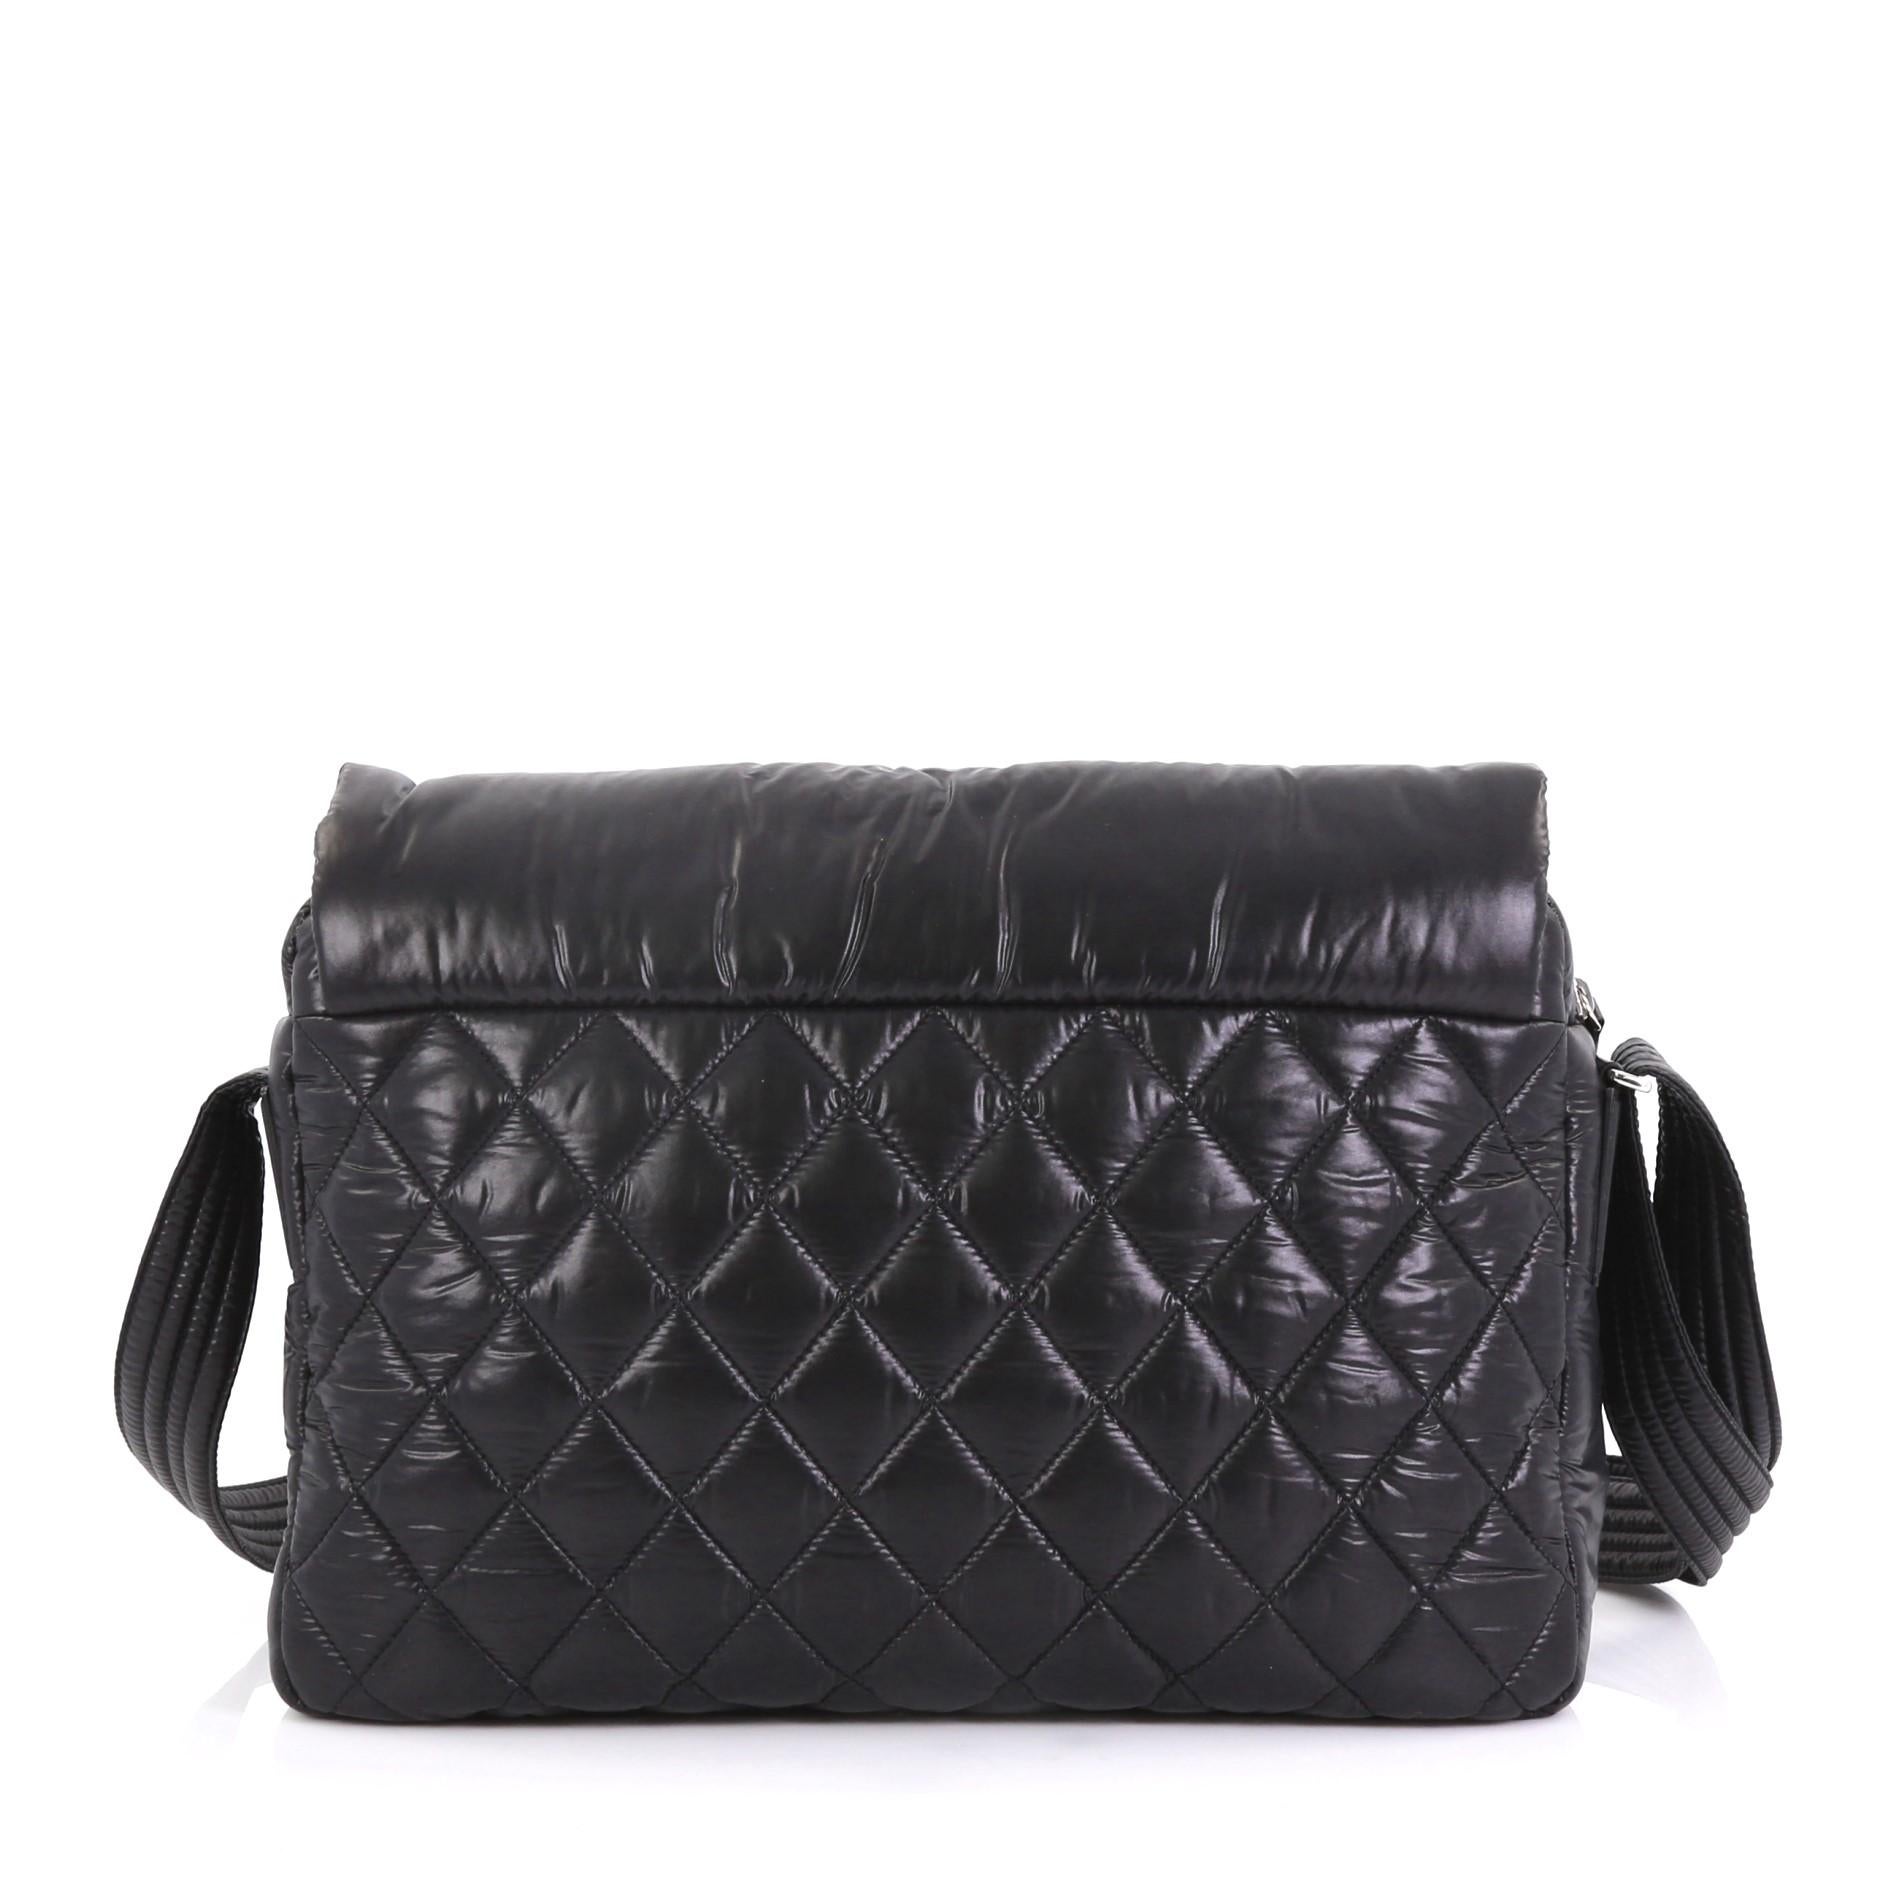 Black Chanel Coco Cocoon Messenger Bag Quilted Nylon Large